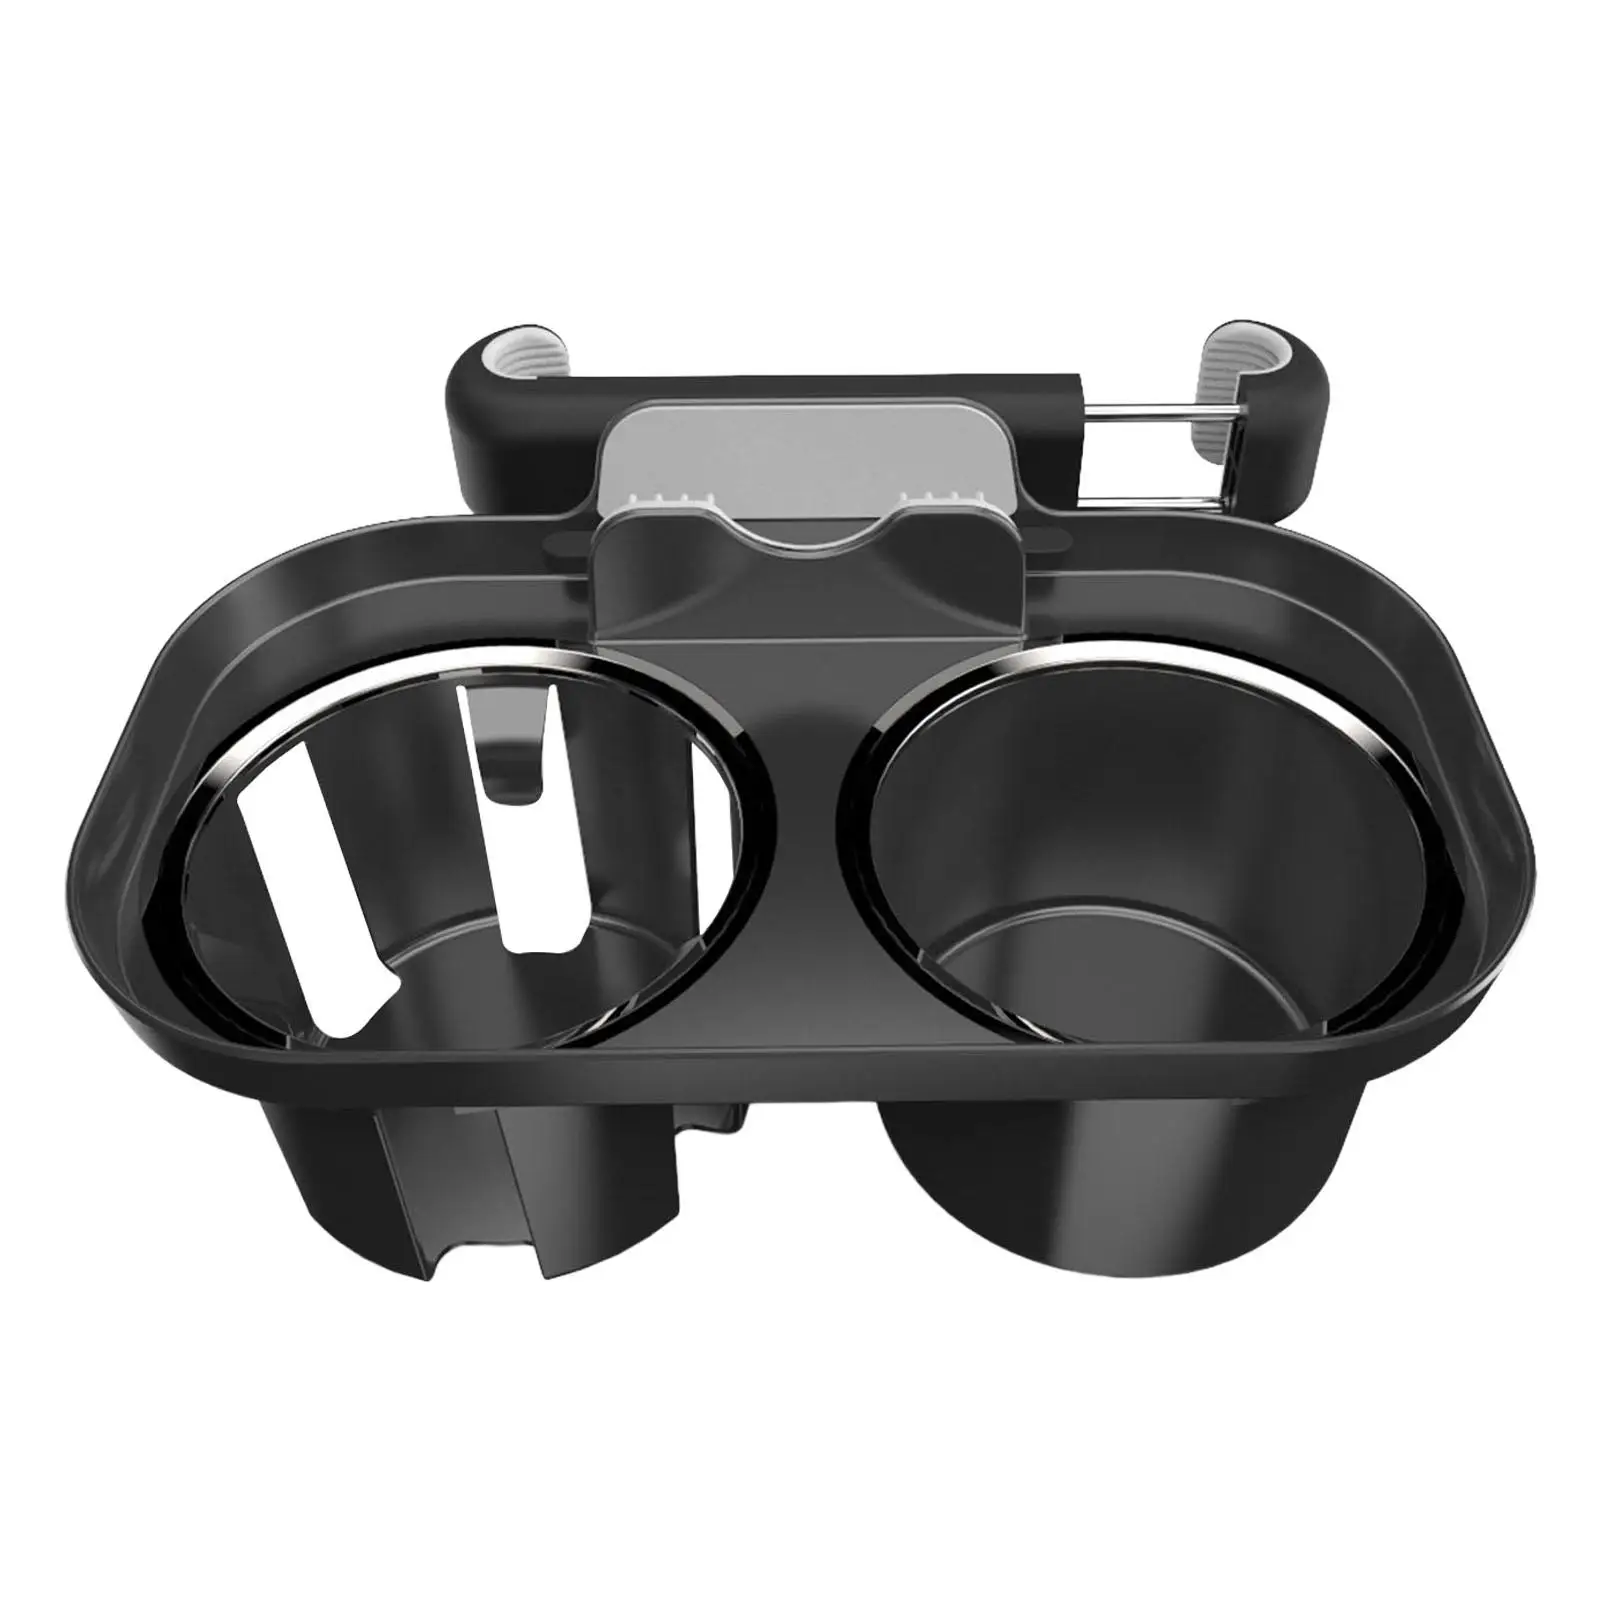 Universal Car Cup Holder Practical Multifunctional Food Tray Drink Pocket for